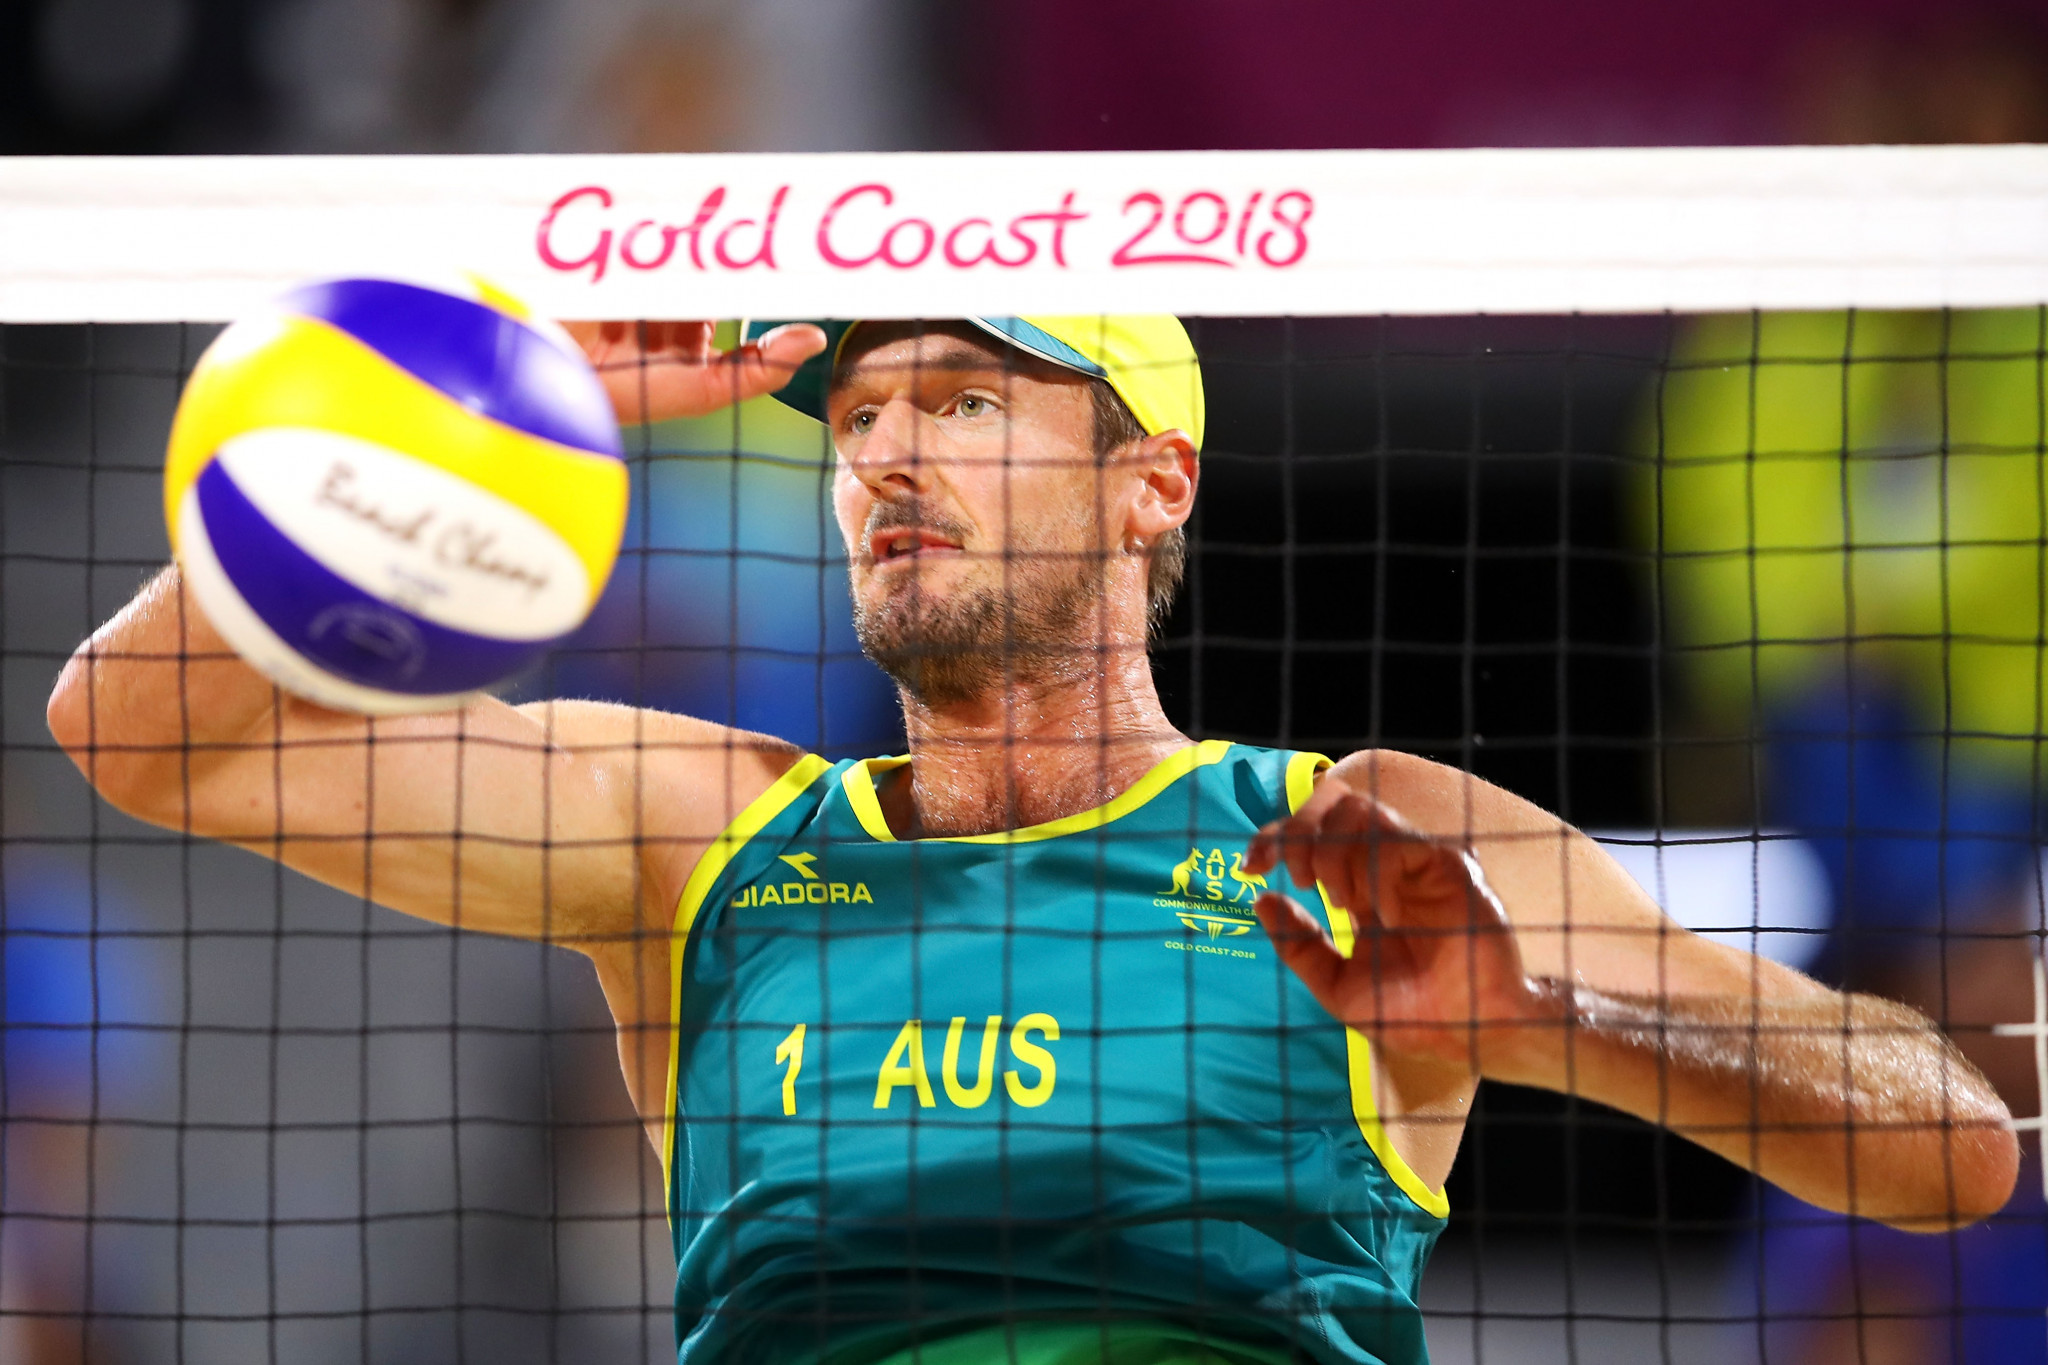 Beach volleyball makes Commonwealth Games debut on Gold Coast sands